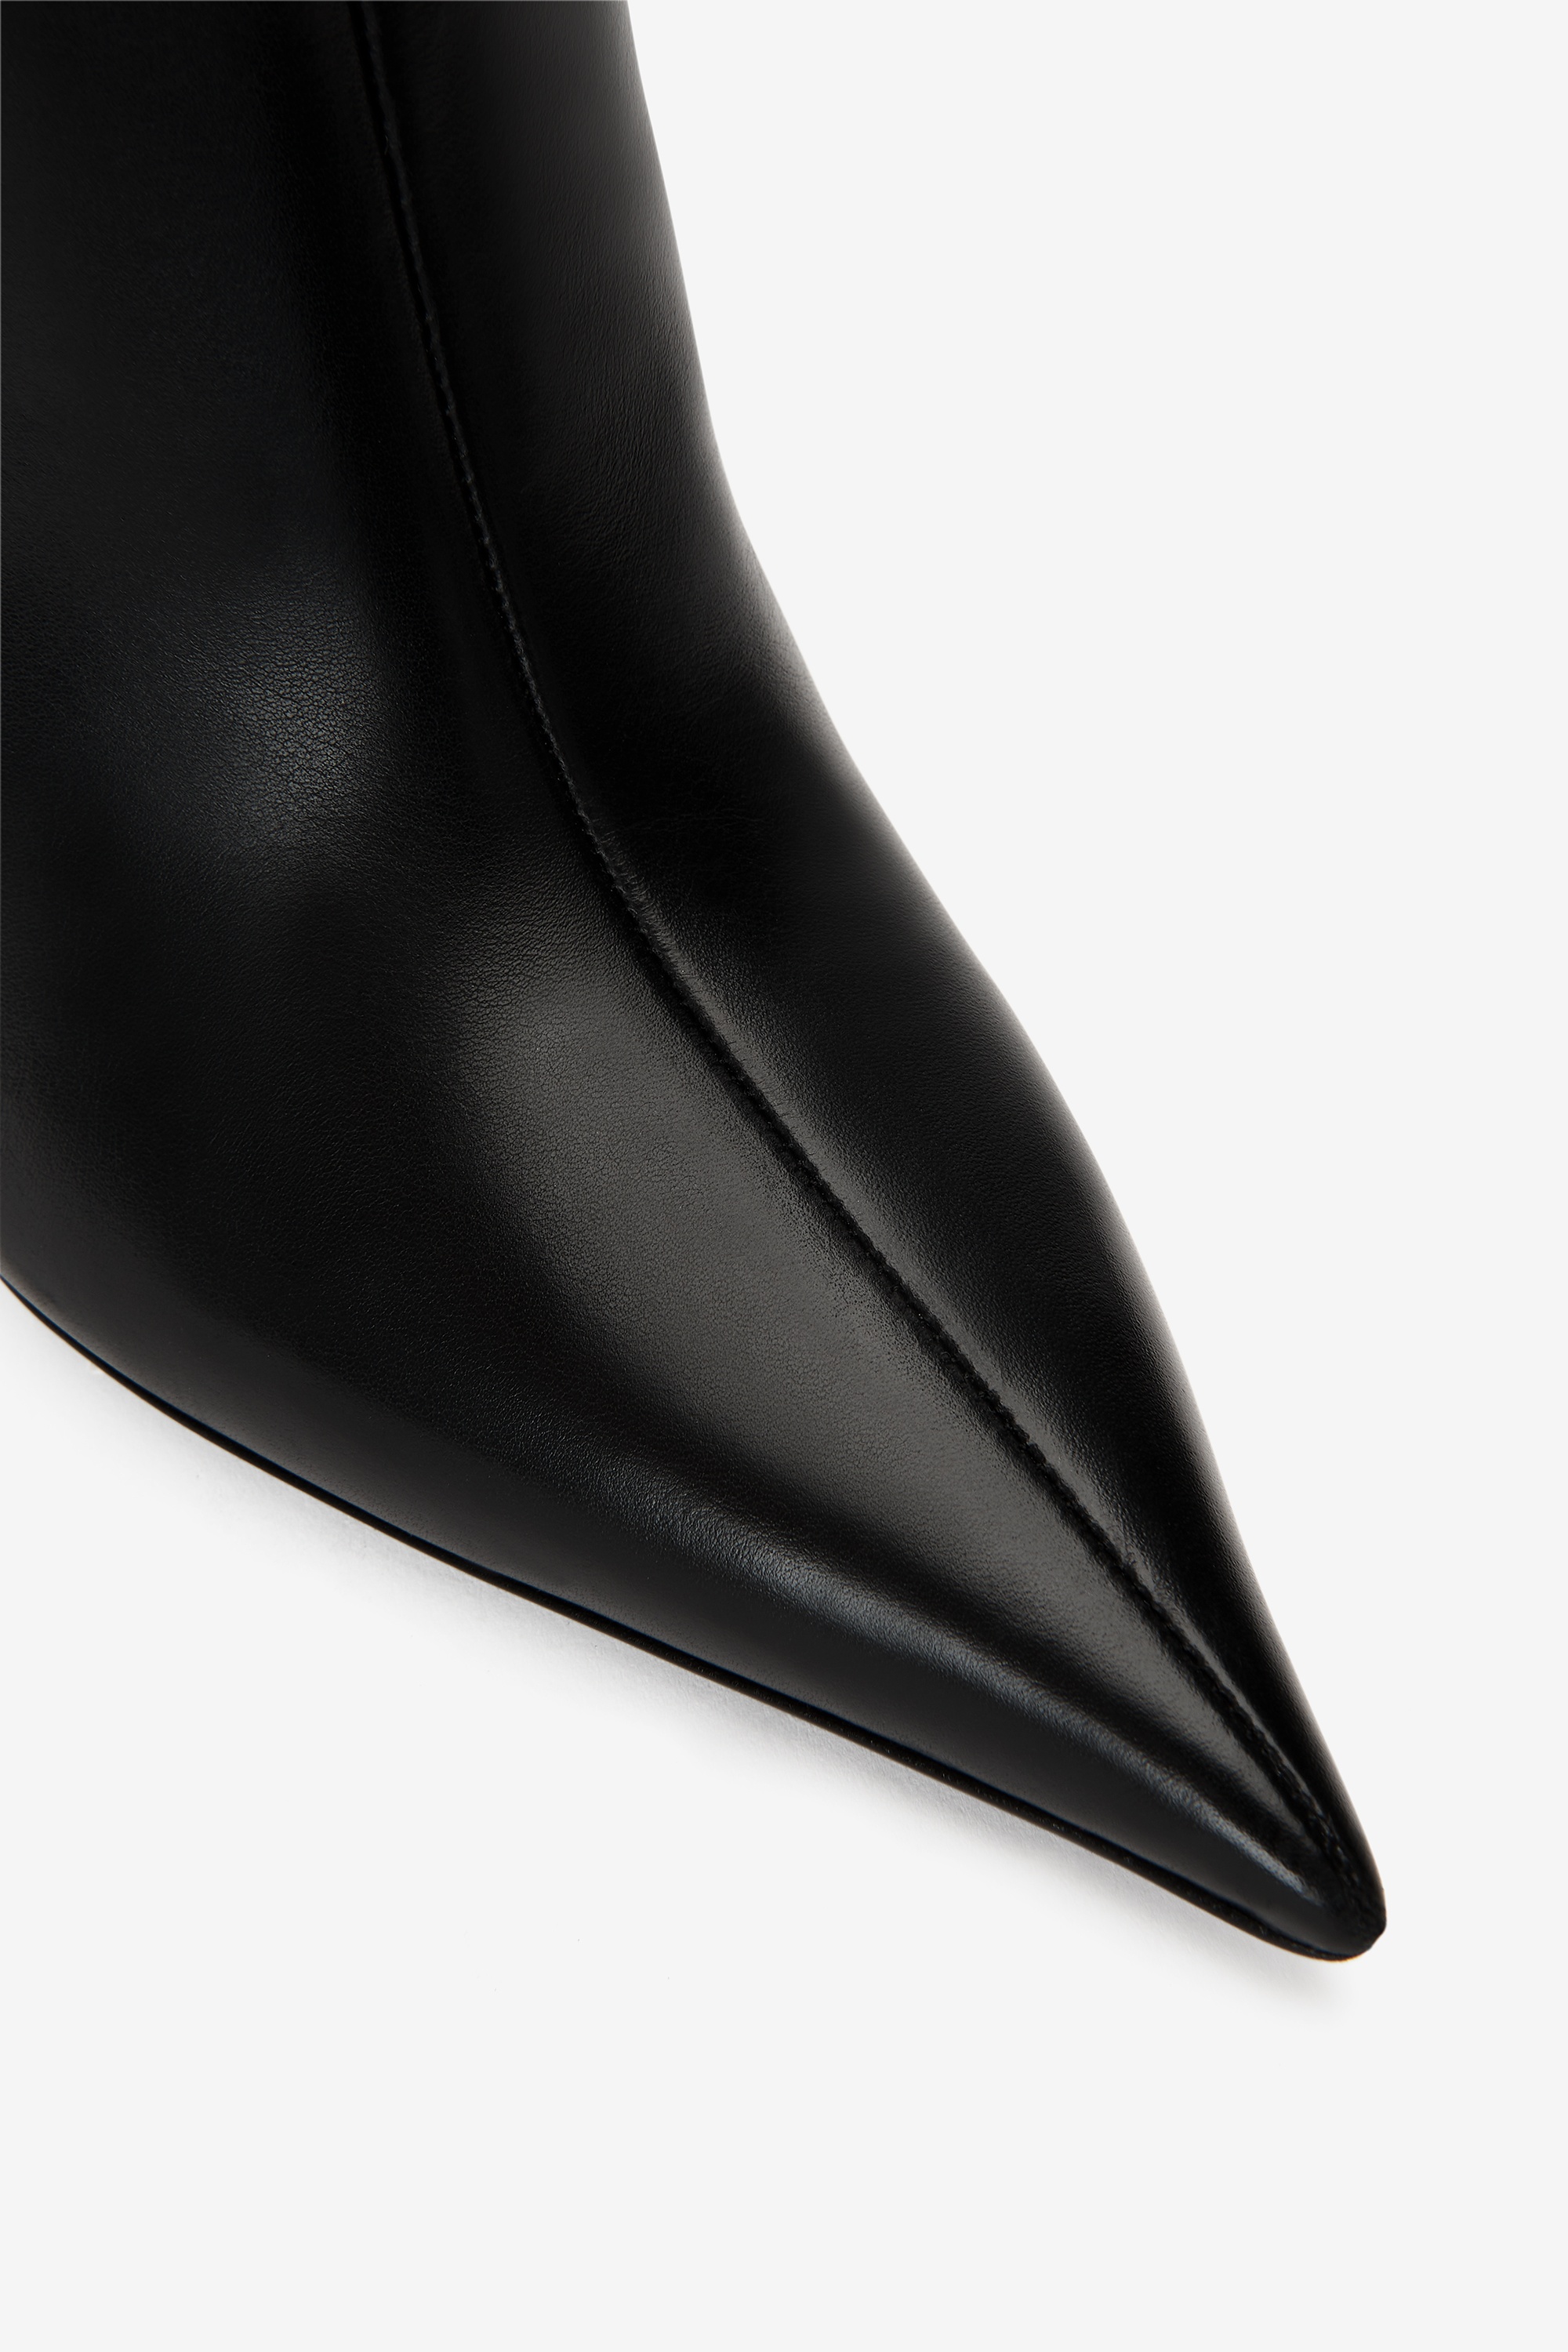 delphine tall boot in leather - 6